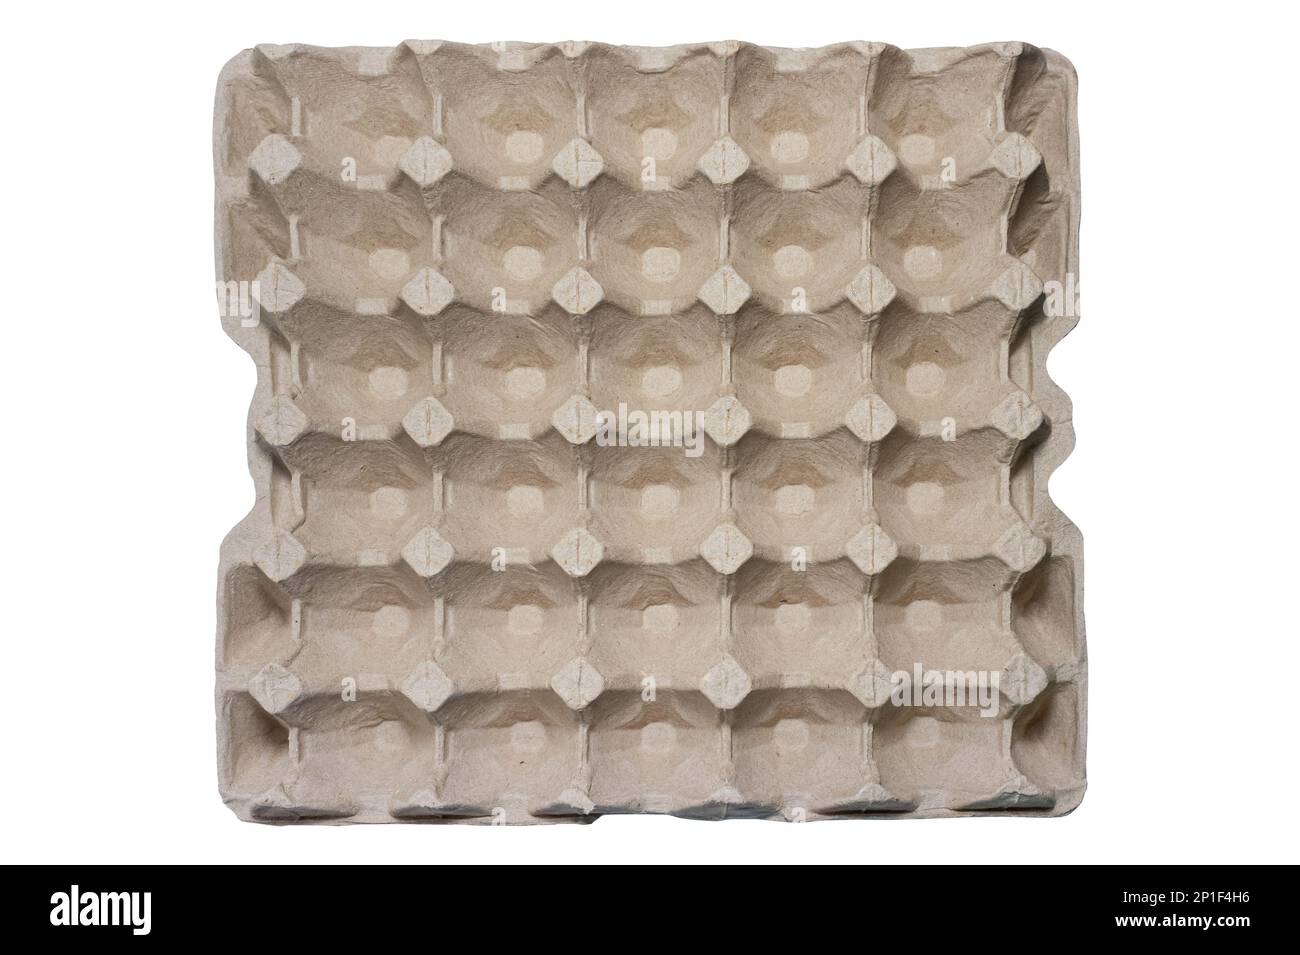 empty paper egg tray for 30 eggs. isolated on white background Stock Photo